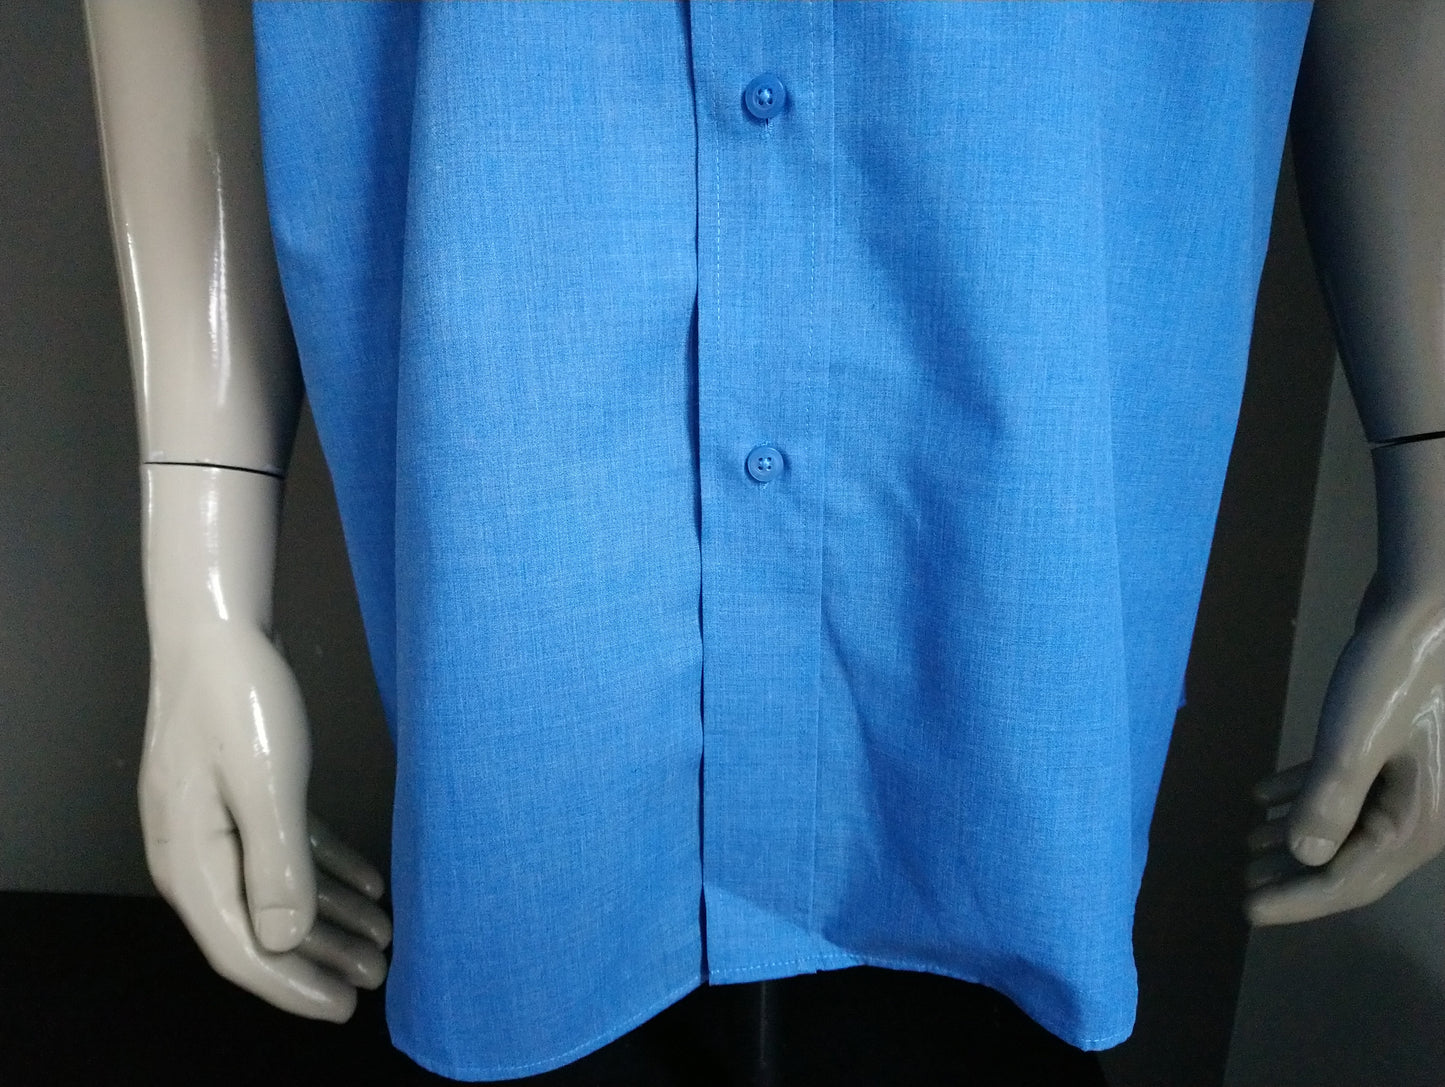 George Shirt Sleeve. Couleur bleue. Taille xl.